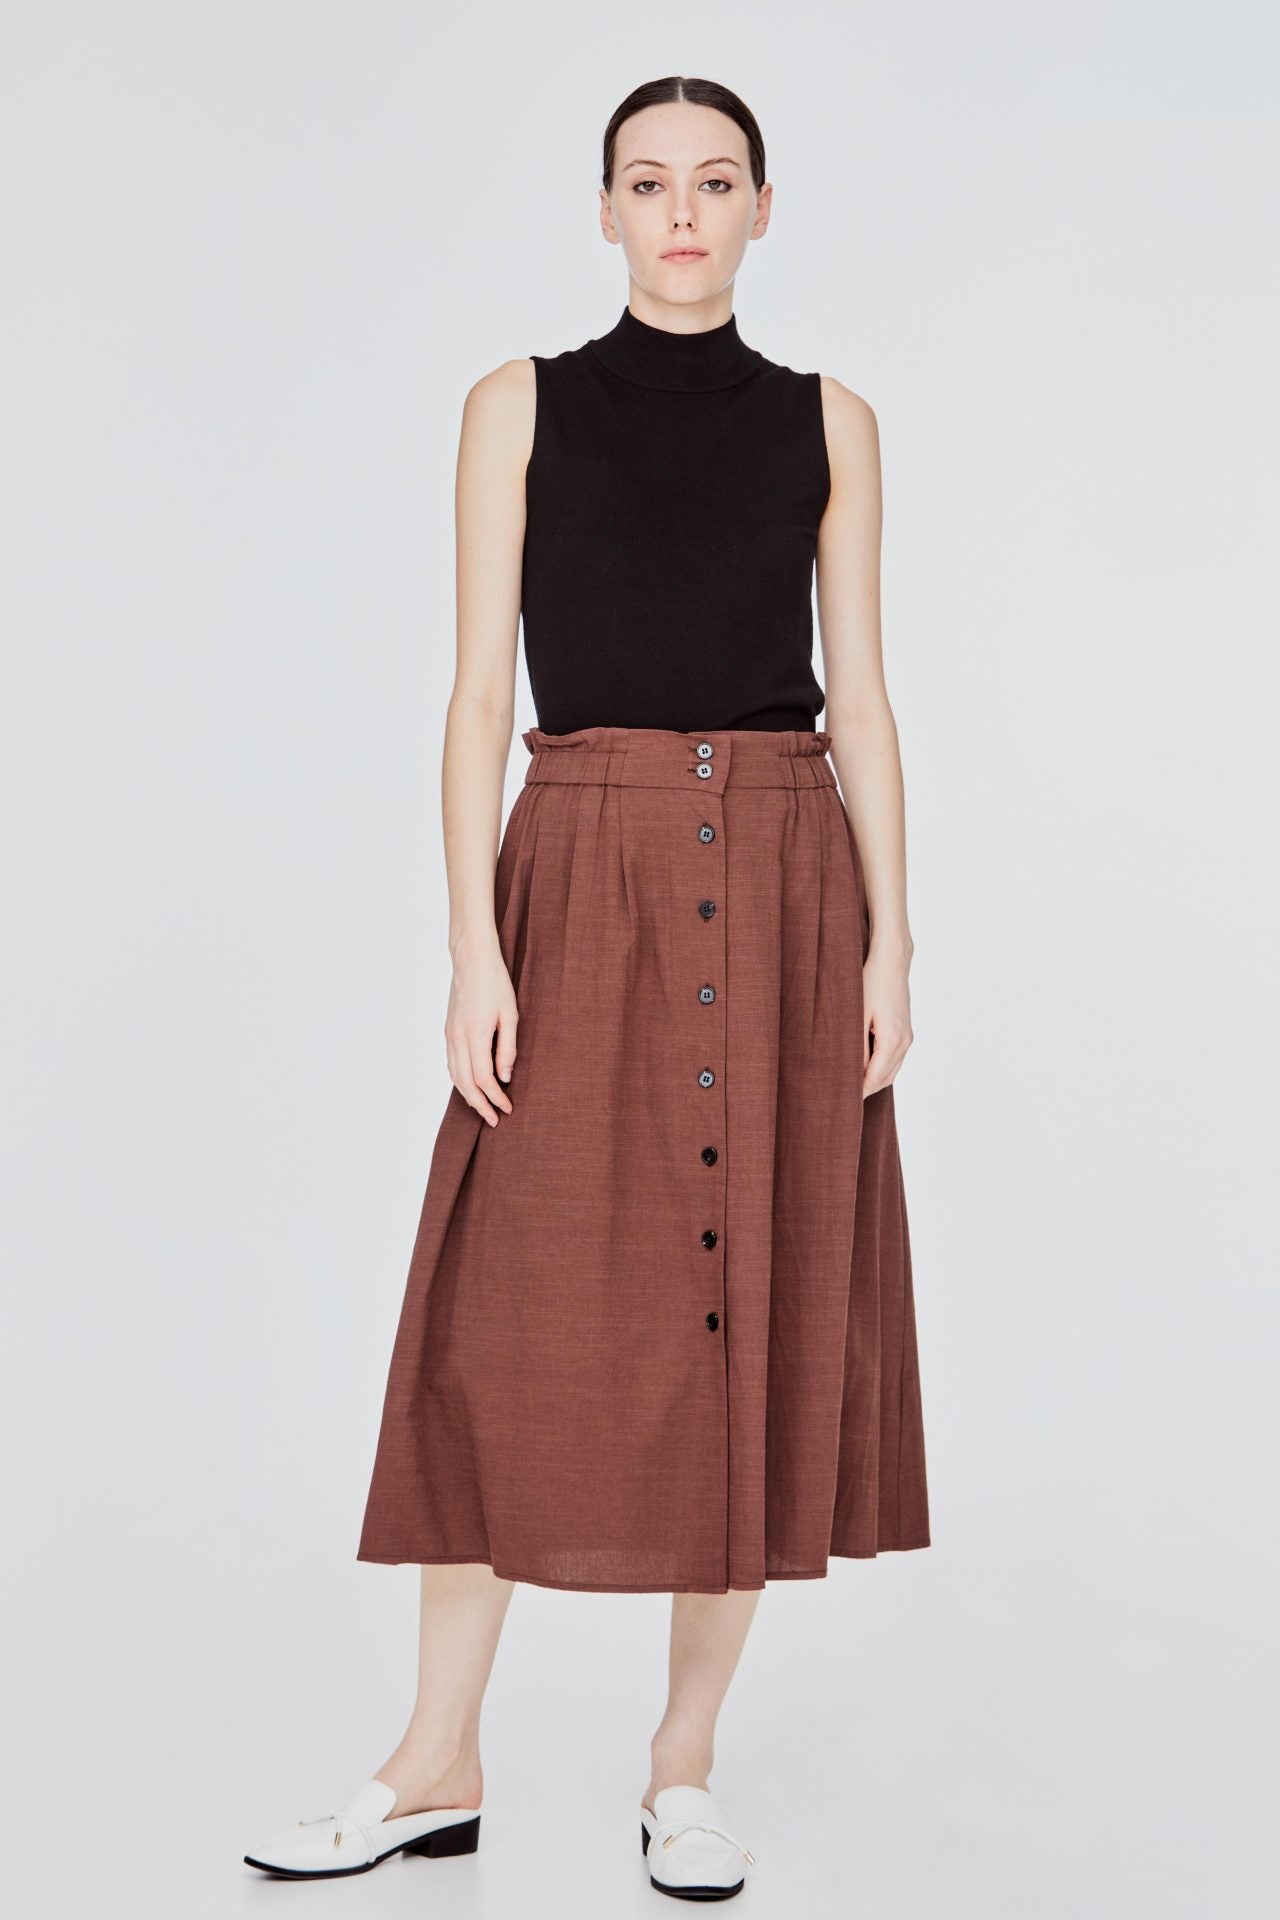 AS 11426 BUTTON UP A-LINE FLARE SKIRT BROWN